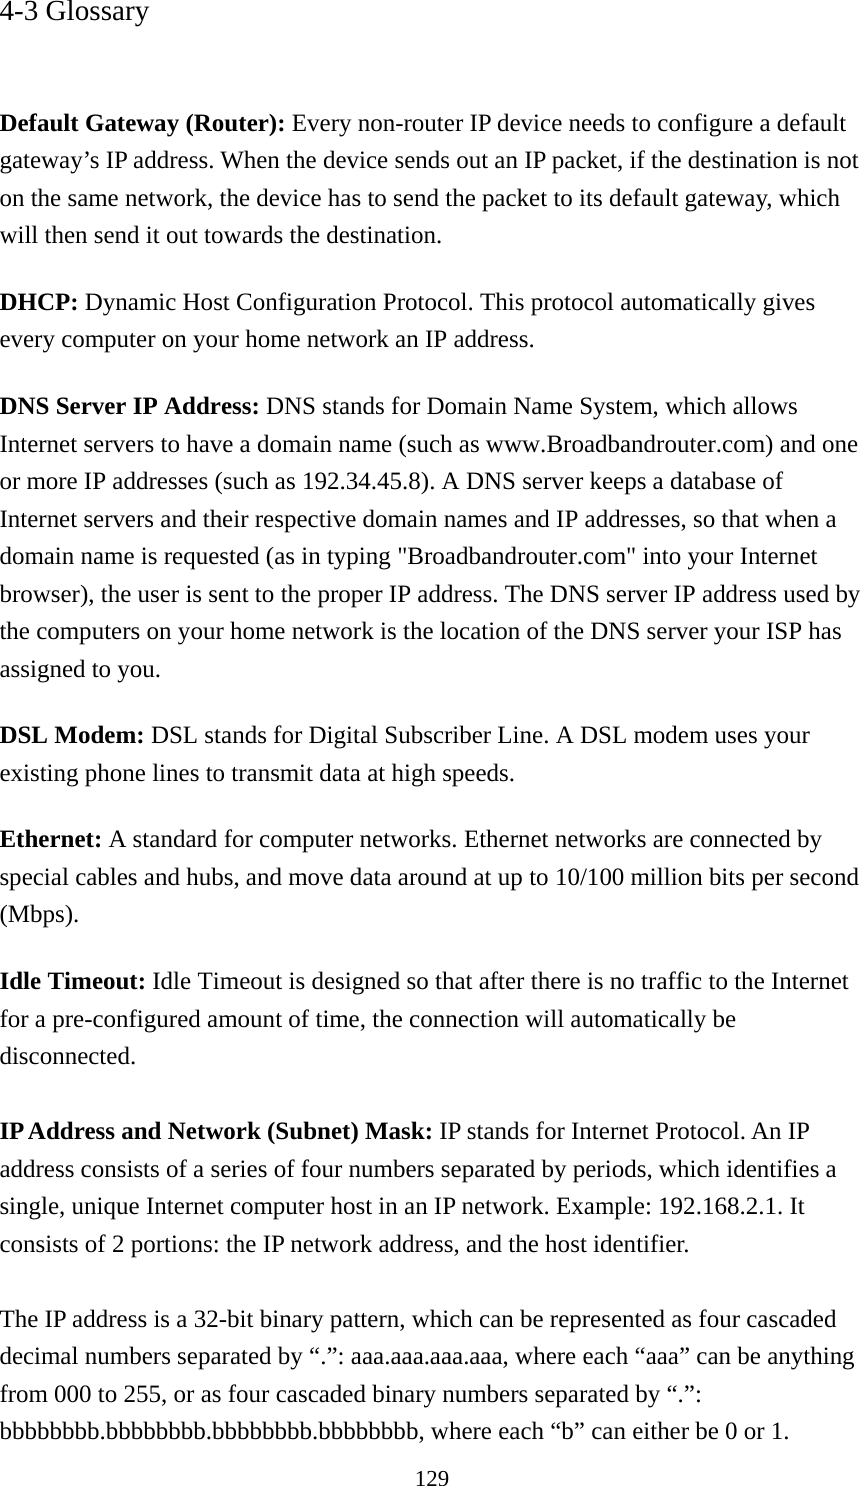 129 4-3 Glossary   Default Gateway (Router): Every non-router IP device needs to configure a default gateway’s IP address. When the device sends out an IP packet, if the destination is not on the same network, the device has to send the packet to its default gateway, which will then send it out towards the destination. DHCP: Dynamic Host Configuration Protocol. This protocol automatically gives every computer on your home network an IP address. DNS Server IP Address: DNS stands for Domain Name System, which allows Internet servers to have a domain name (such as www.Broadbandrouter.com) and one or more IP addresses (such as 192.34.45.8). A DNS server keeps a database of Internet servers and their respective domain names and IP addresses, so that when a domain name is requested (as in typing &quot;Broadbandrouter.com&quot; into your Internet browser), the user is sent to the proper IP address. The DNS server IP address used by the computers on your home network is the location of the DNS server your ISP has assigned to you.   DSL Modem: DSL stands for Digital Subscriber Line. A DSL modem uses your existing phone lines to transmit data at high speeds.   Ethernet: A standard for computer networks. Ethernet networks are connected by special cables and hubs, and move data around at up to 10/100 million bits per second (Mbps).  Idle Timeout: Idle Timeout is designed so that after there is no traffic to the Internet for a pre-configured amount of time, the connection will automatically be disconnected.  IP Address and Network (Subnet) Mask: IP stands for Internet Protocol. An IP address consists of a series of four numbers separated by periods, which identifies a single, unique Internet computer host in an IP network. Example: 192.168.2.1. It consists of 2 portions: the IP network address, and the host identifier.  The IP address is a 32-bit binary pattern, which can be represented as four cascaded decimal numbers separated by “.”: aaa.aaa.aaa.aaa, where each “aaa” can be anything from 000 to 255, or as four cascaded binary numbers separated by “.”: bbbbbbbb.bbbbbbbb.bbbbbbbb.bbbbbbbb, where each “b” can either be 0 or 1. 